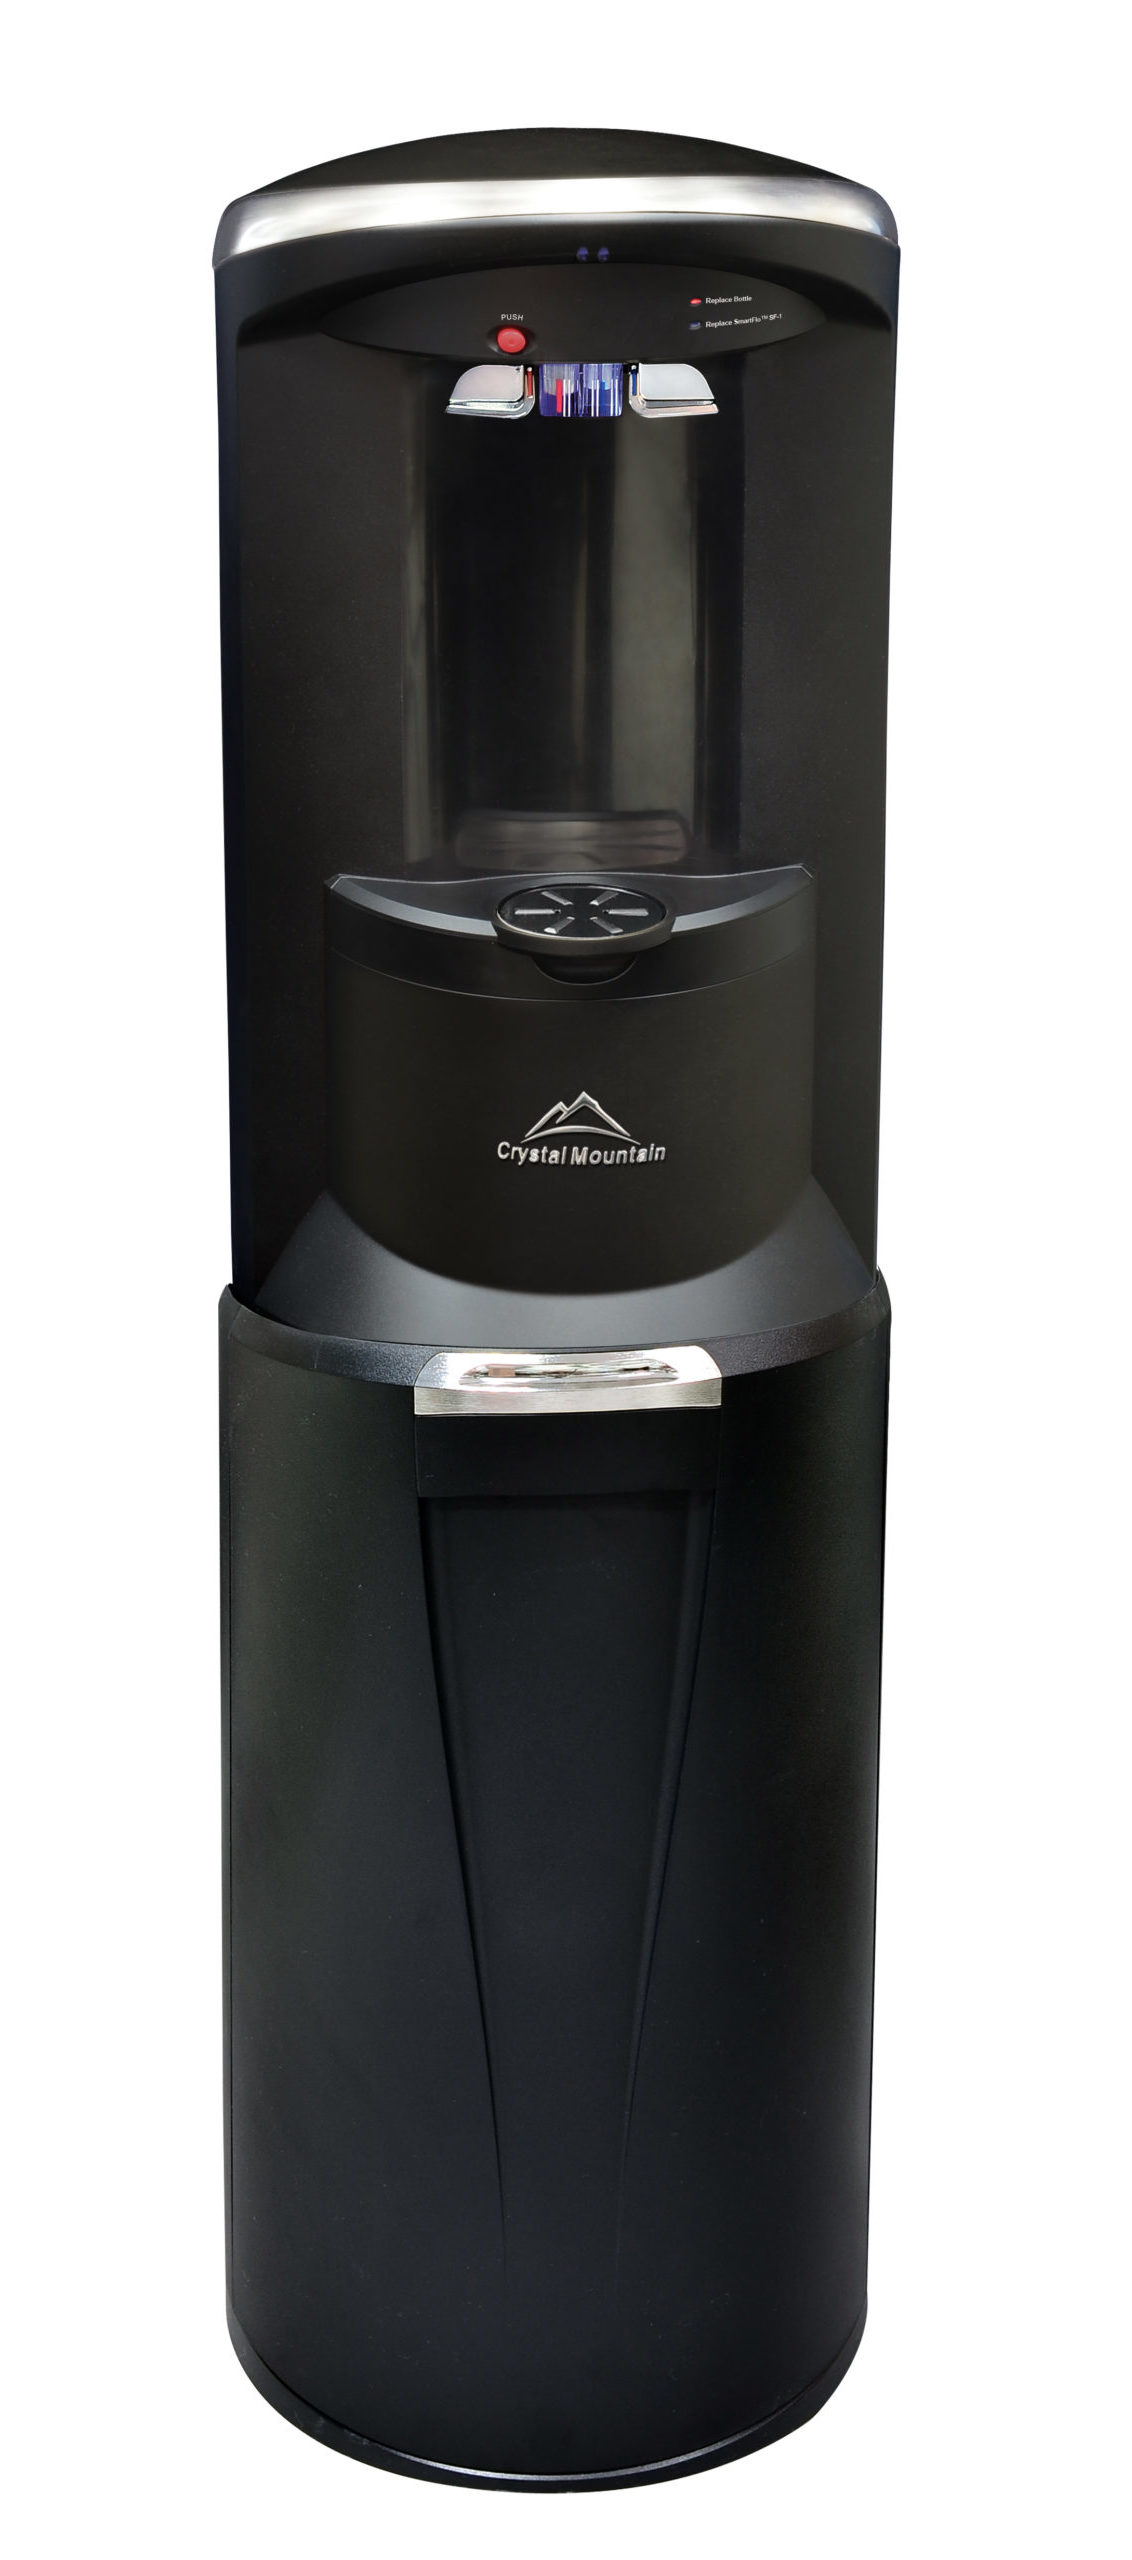 Water Coolers for Home or Office - Buy or Rent | Premium Waters, Inc.